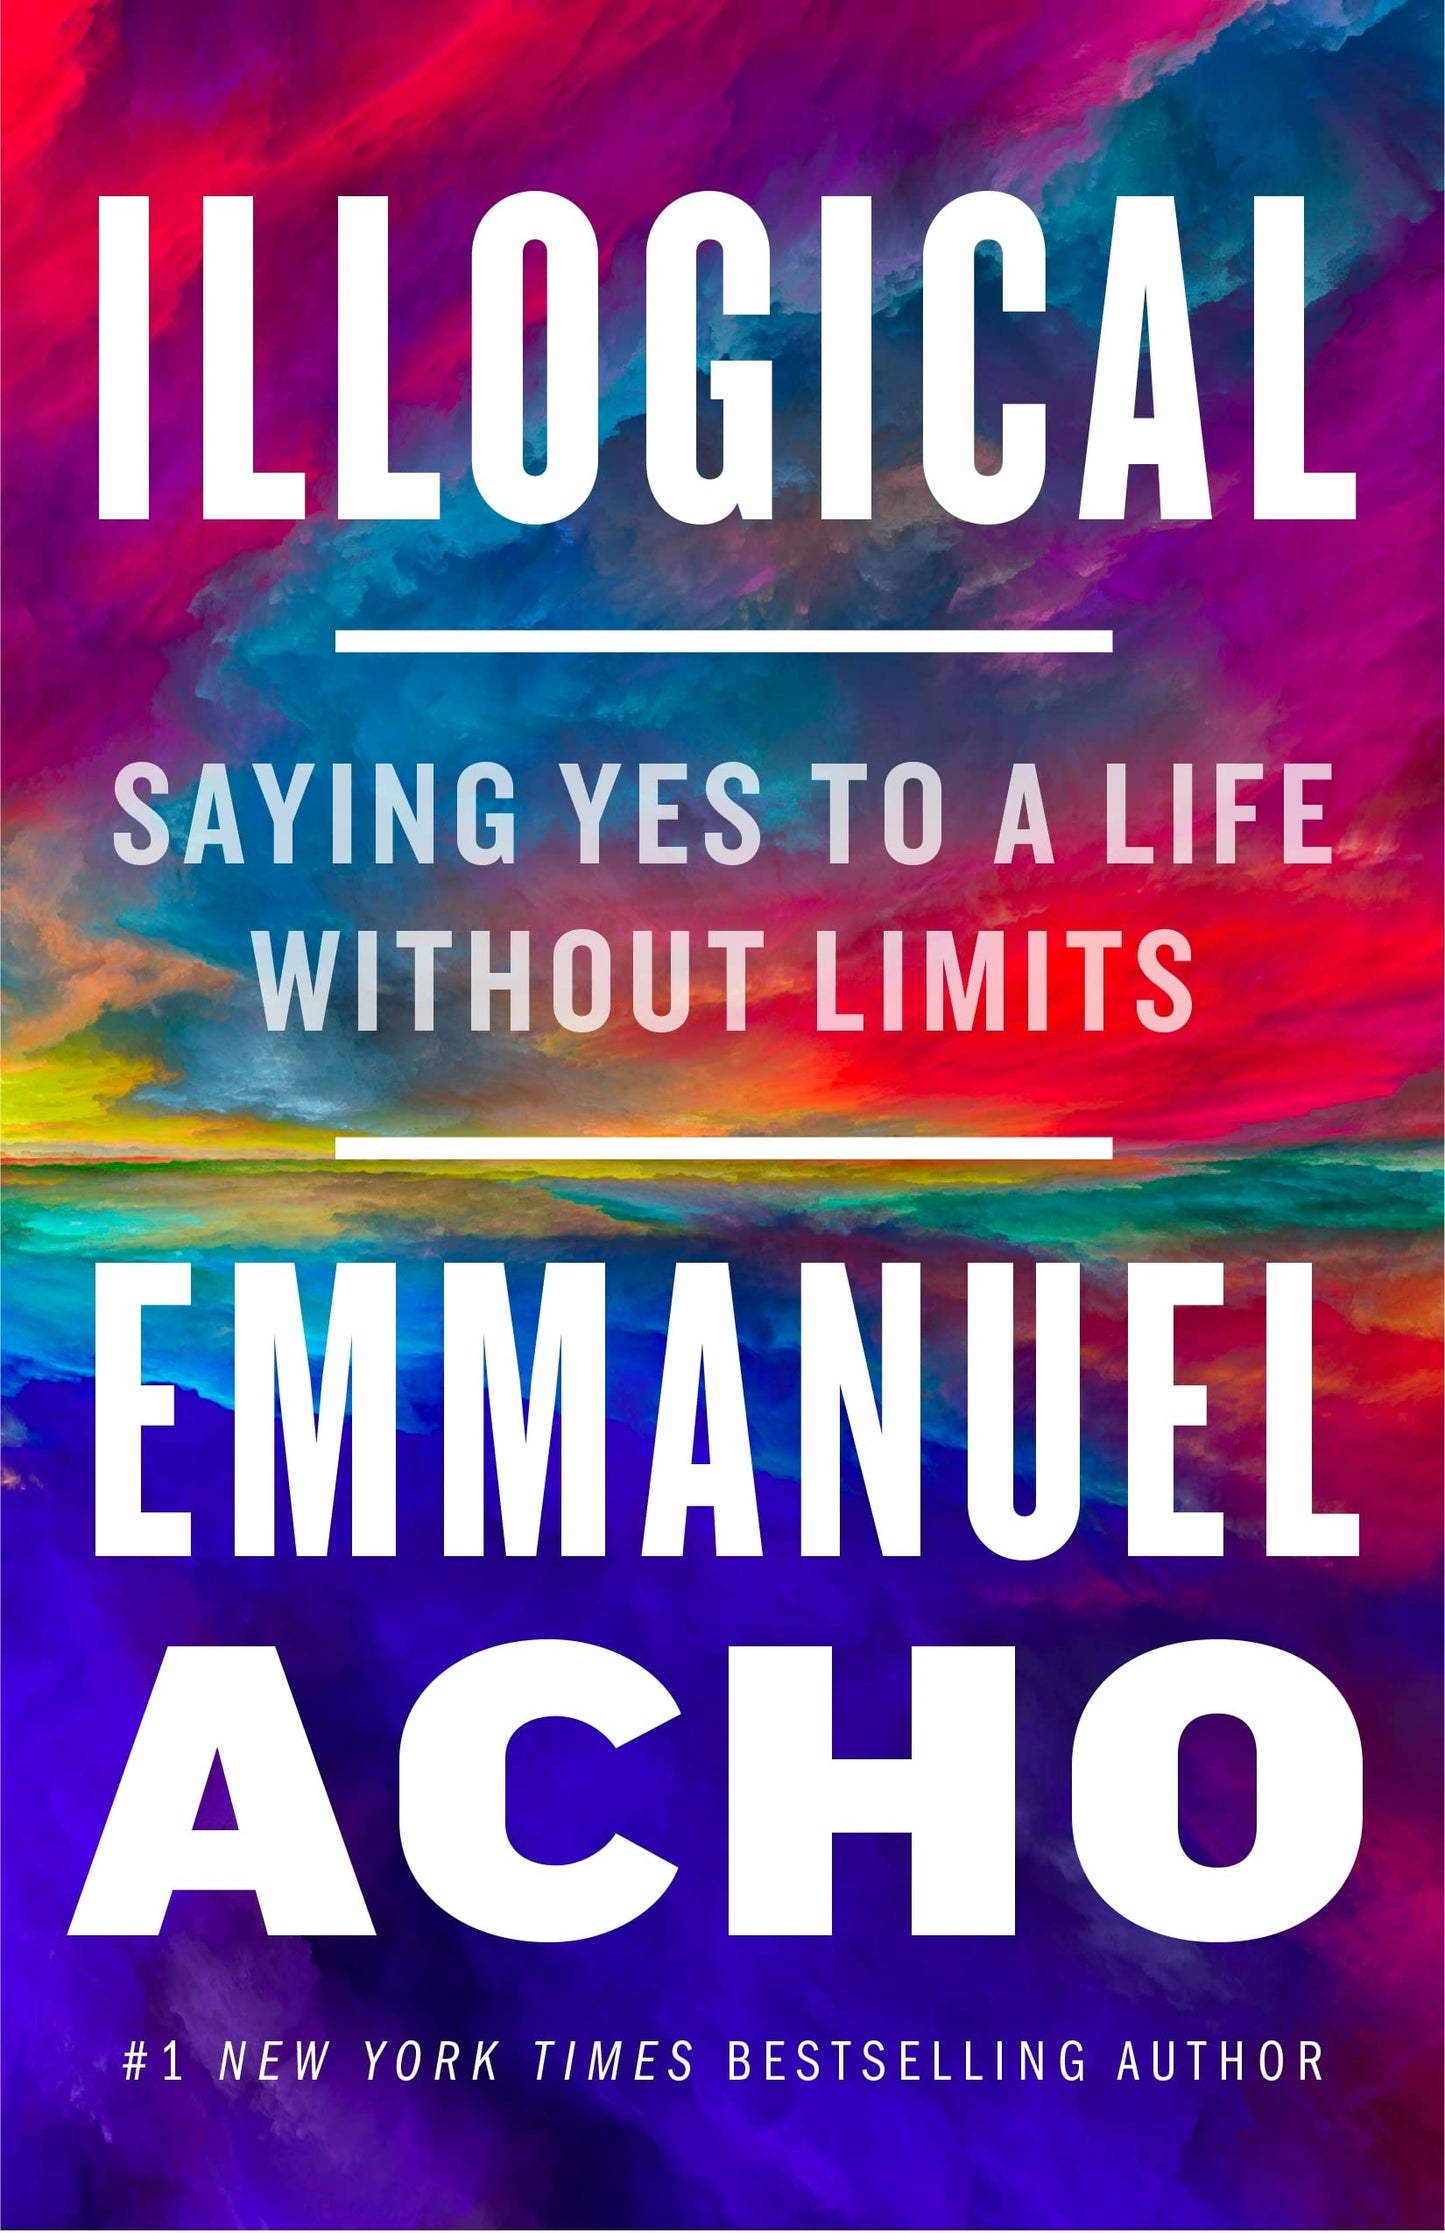 Illogical // Saying Yes to a Life Without Limits